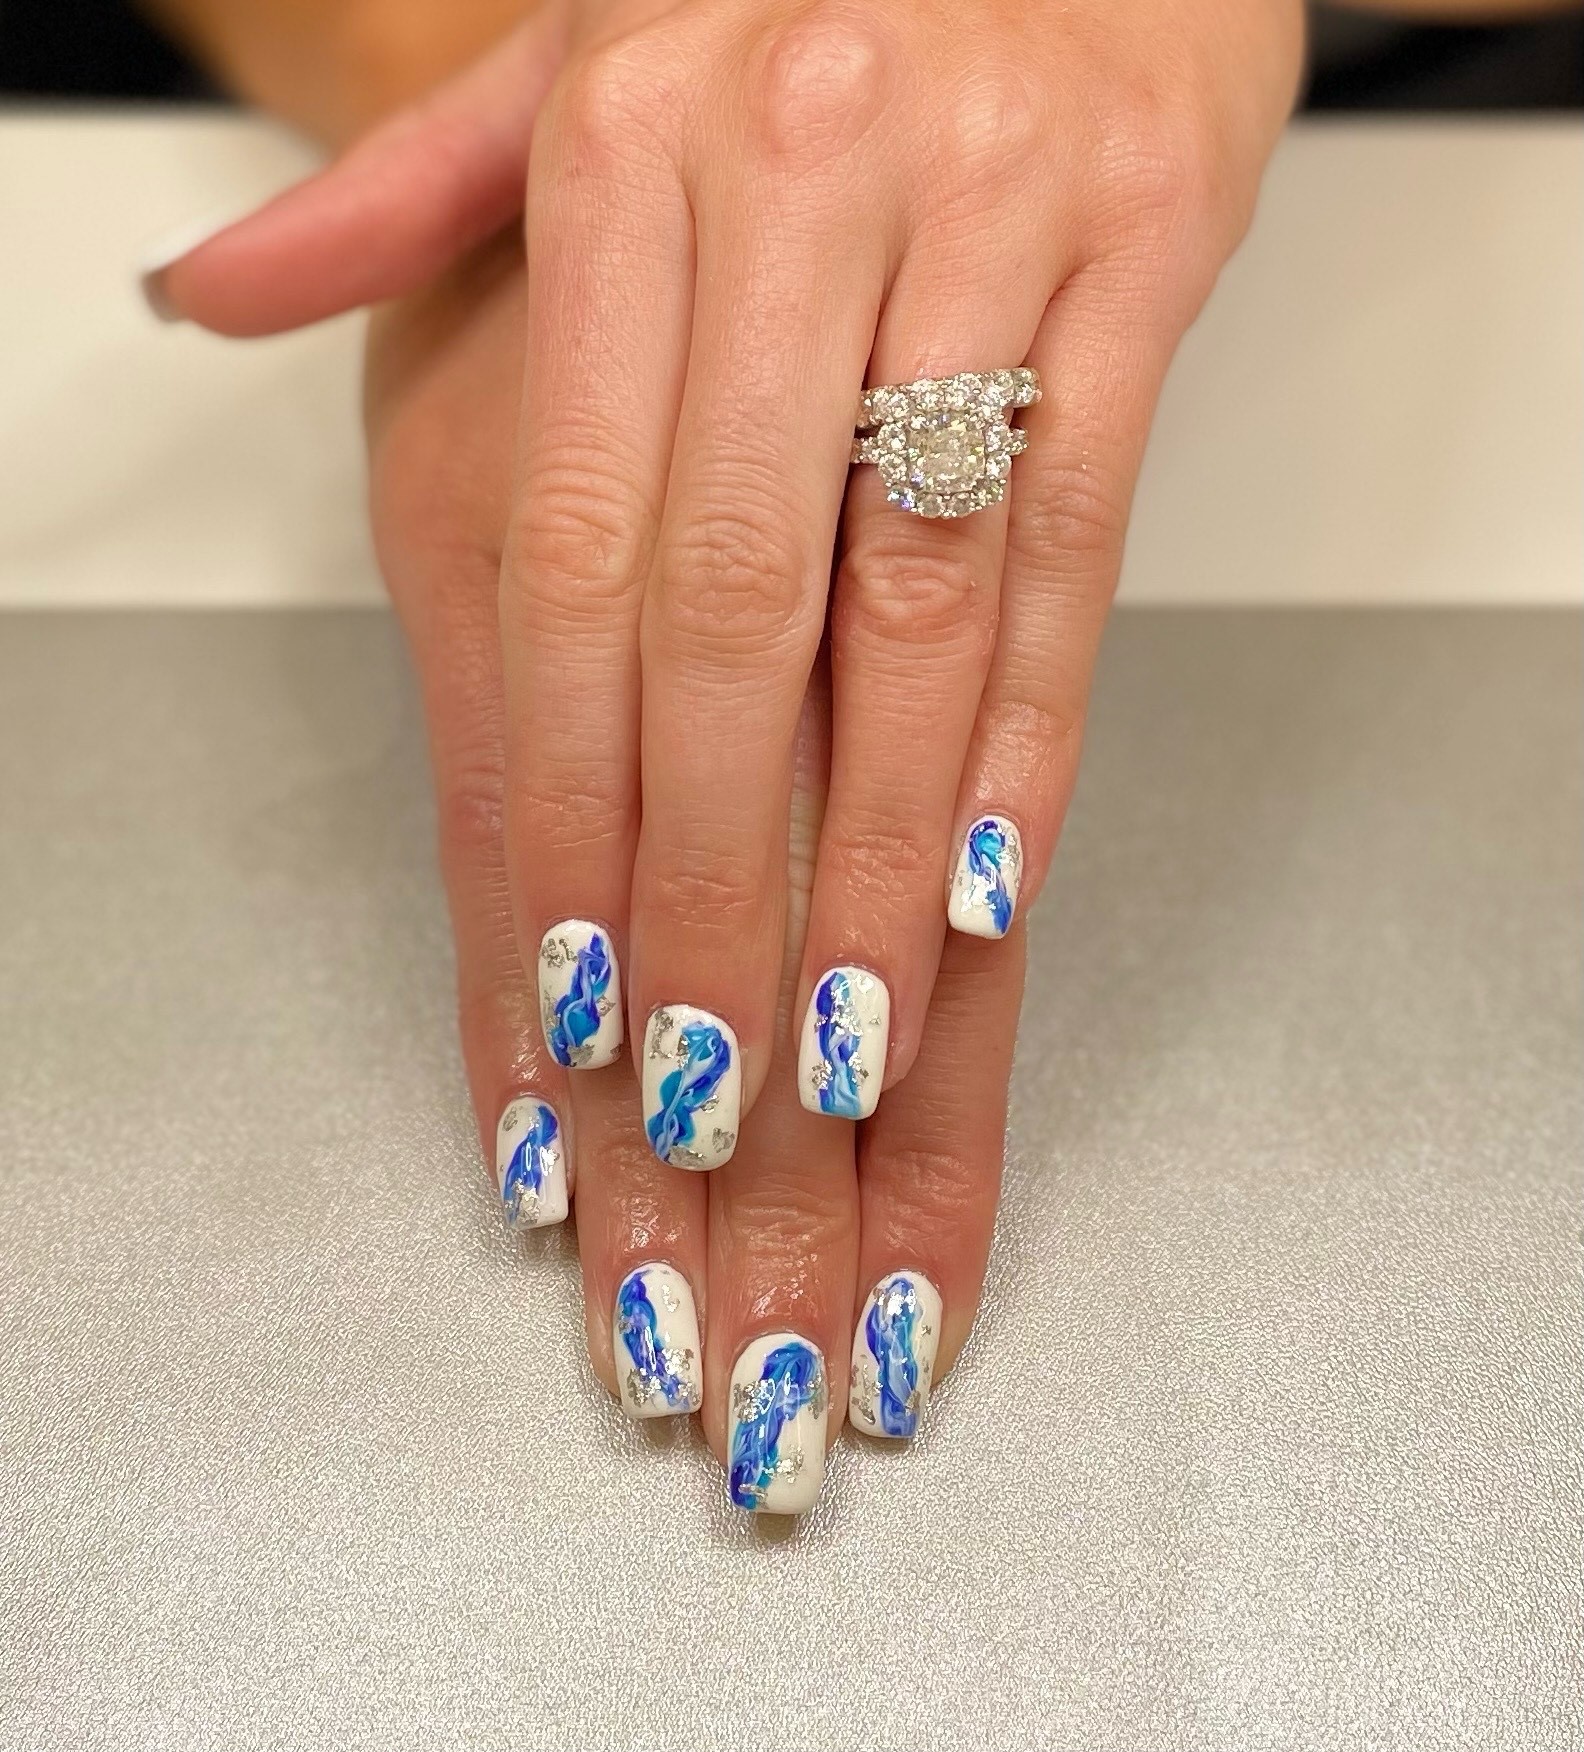 PROSE Nails - Wyckoff 319 Franklin Ave Suite 103, Wyckoff New Jersey 07481